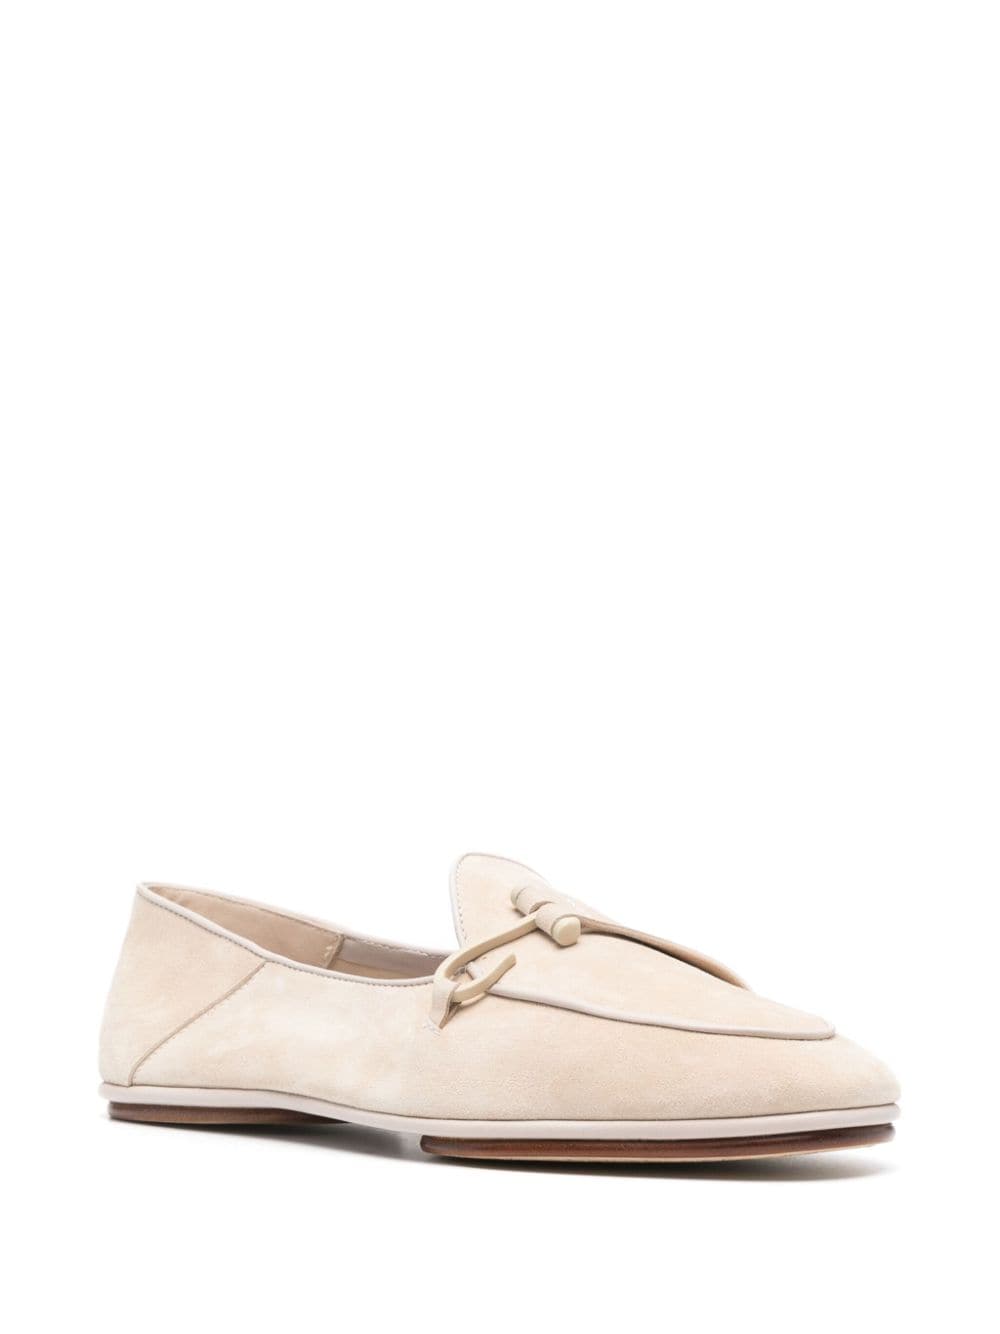 Edhen Milano Comporta Fly suede loafers - Beige